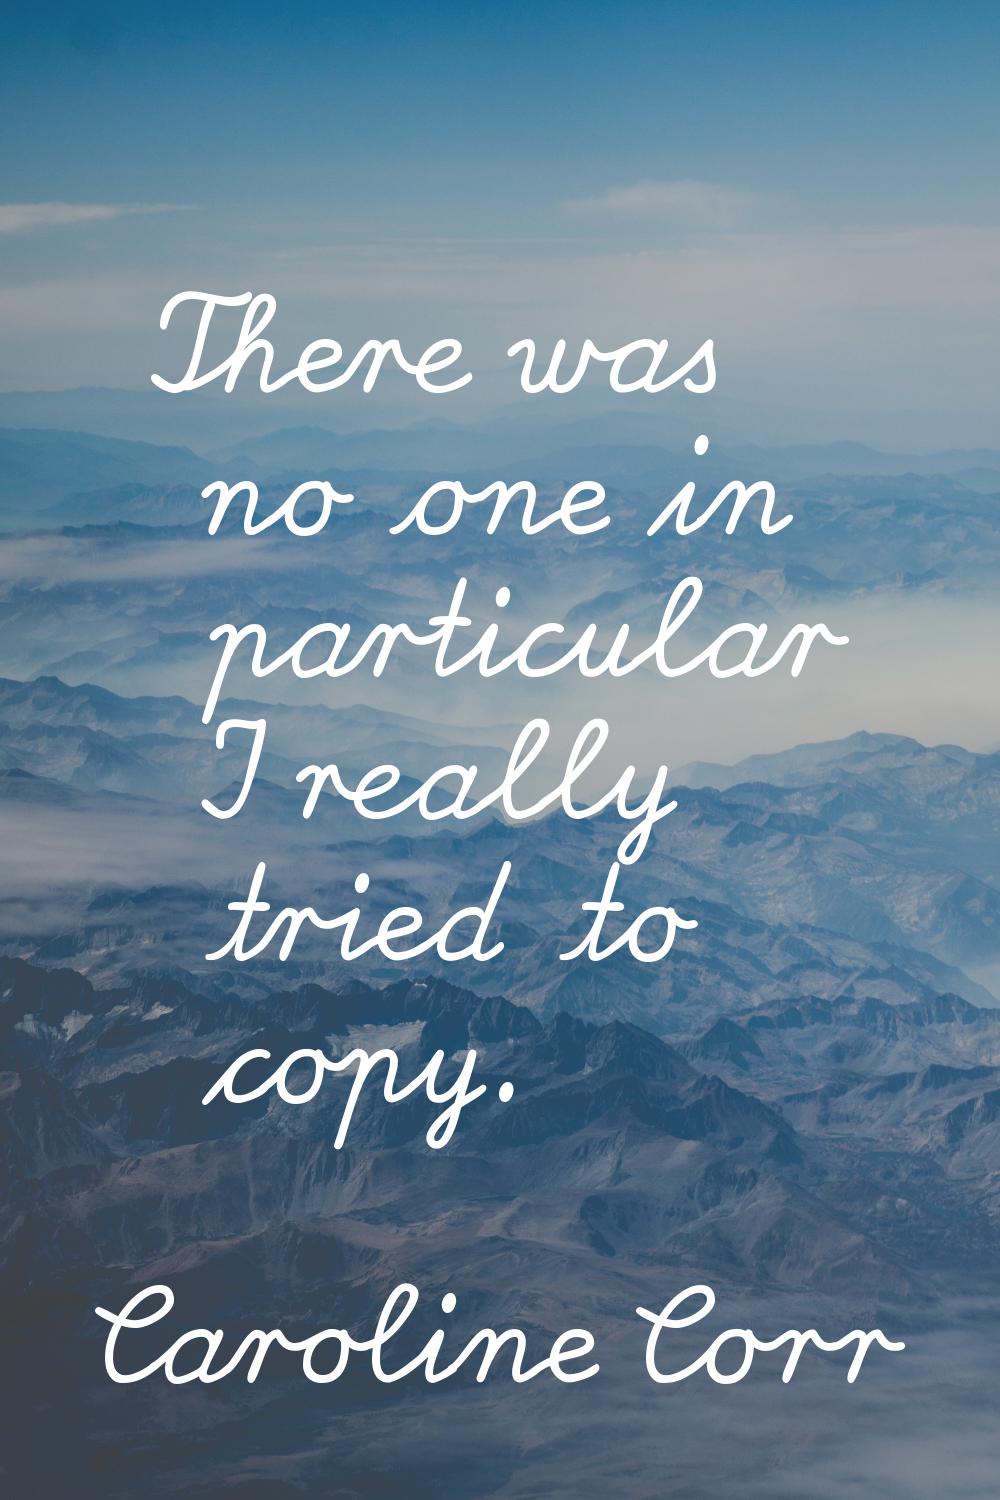 There was no one in particular I really tried to copy.